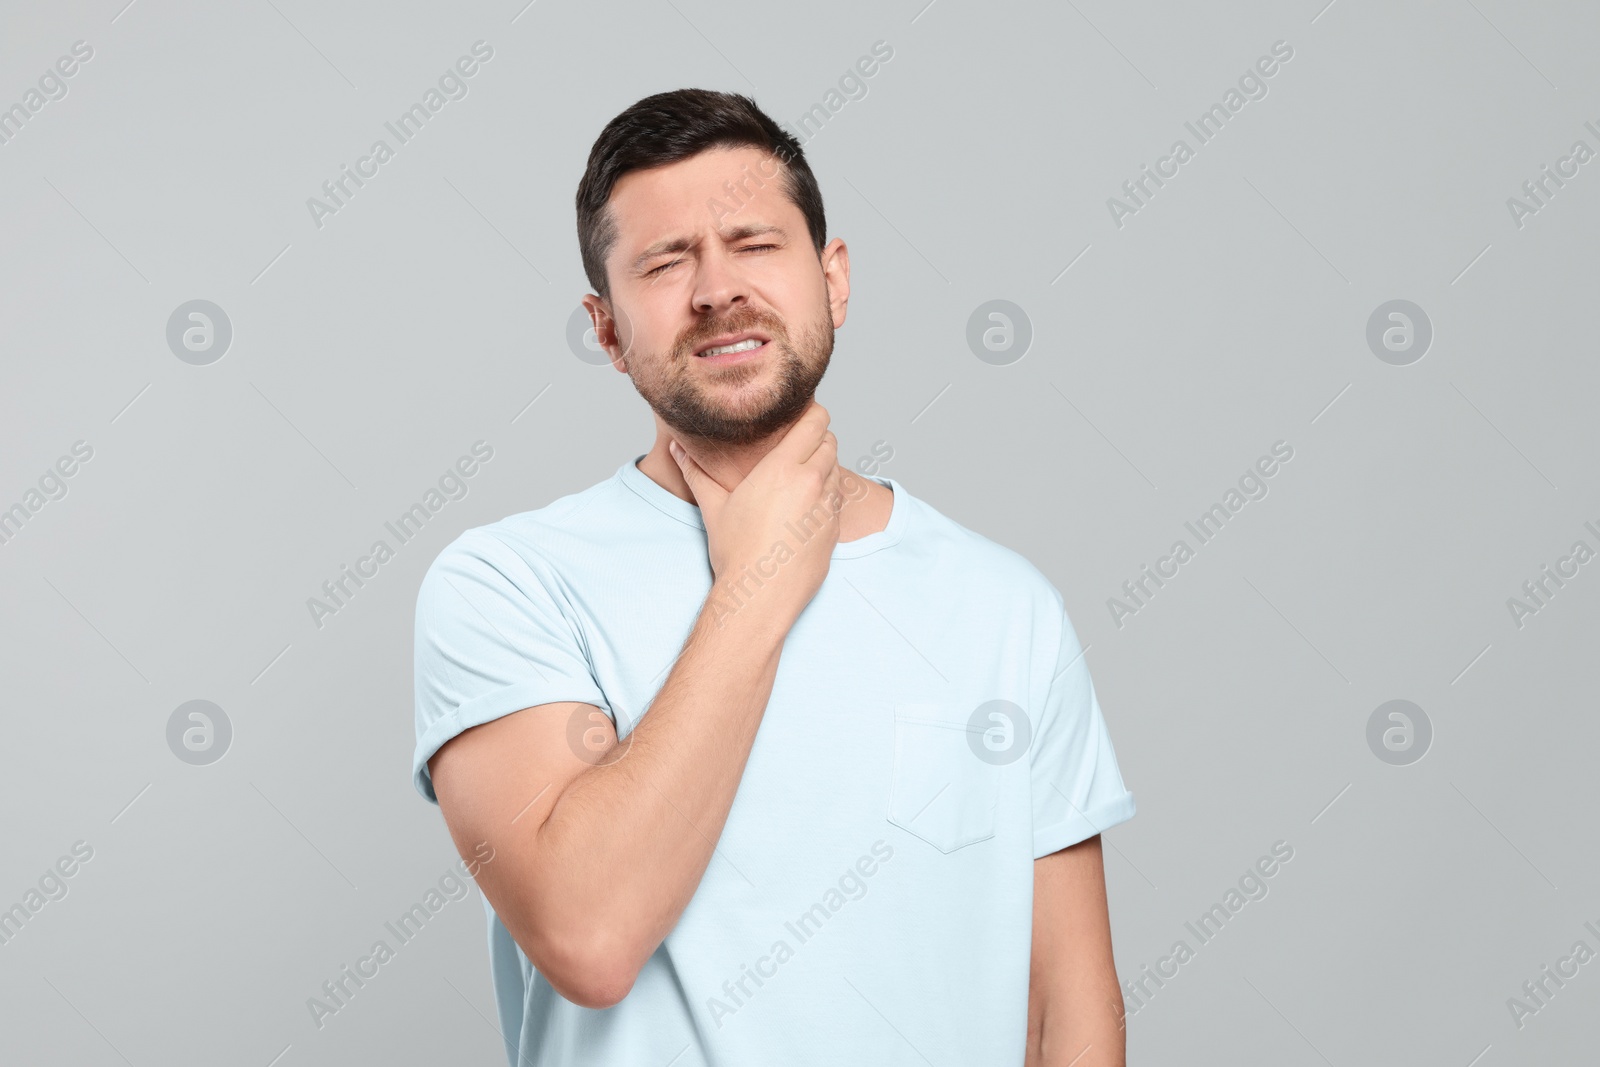 Photo of Man suffering from sore throat on light gray background